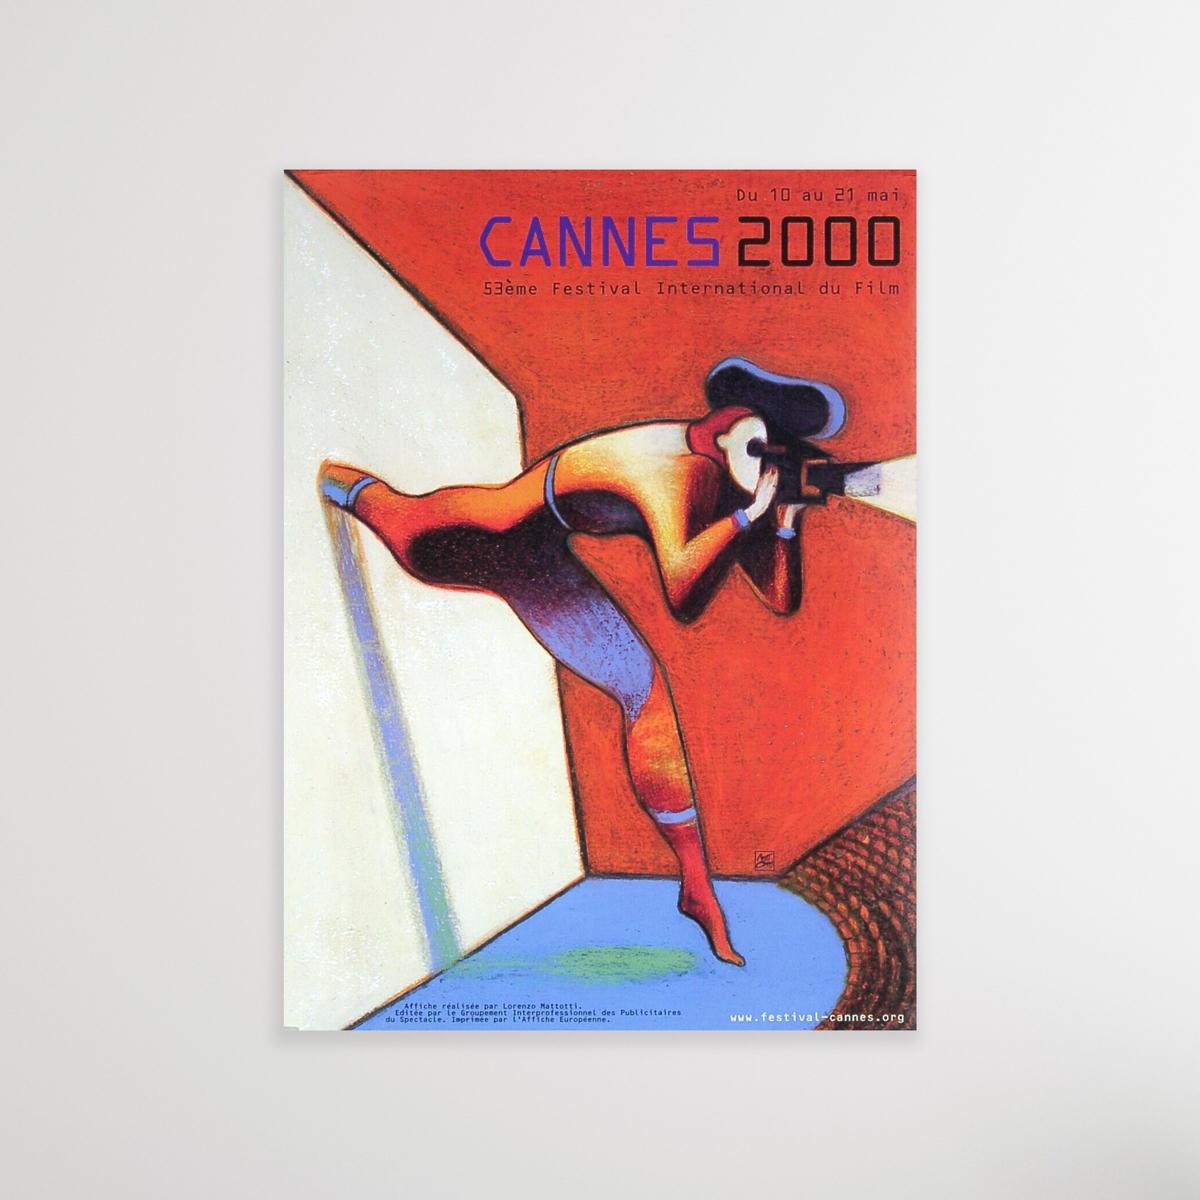 Official promotional poster for the 53rd annual Cannes Film Festival (2000).

Size 33 x 23 inches. Sold unframed. Ships rolled.

The Cannes Film Festival (le Festival de Cannes), founded in 1946,
is one of the world's oldest, most influential, and